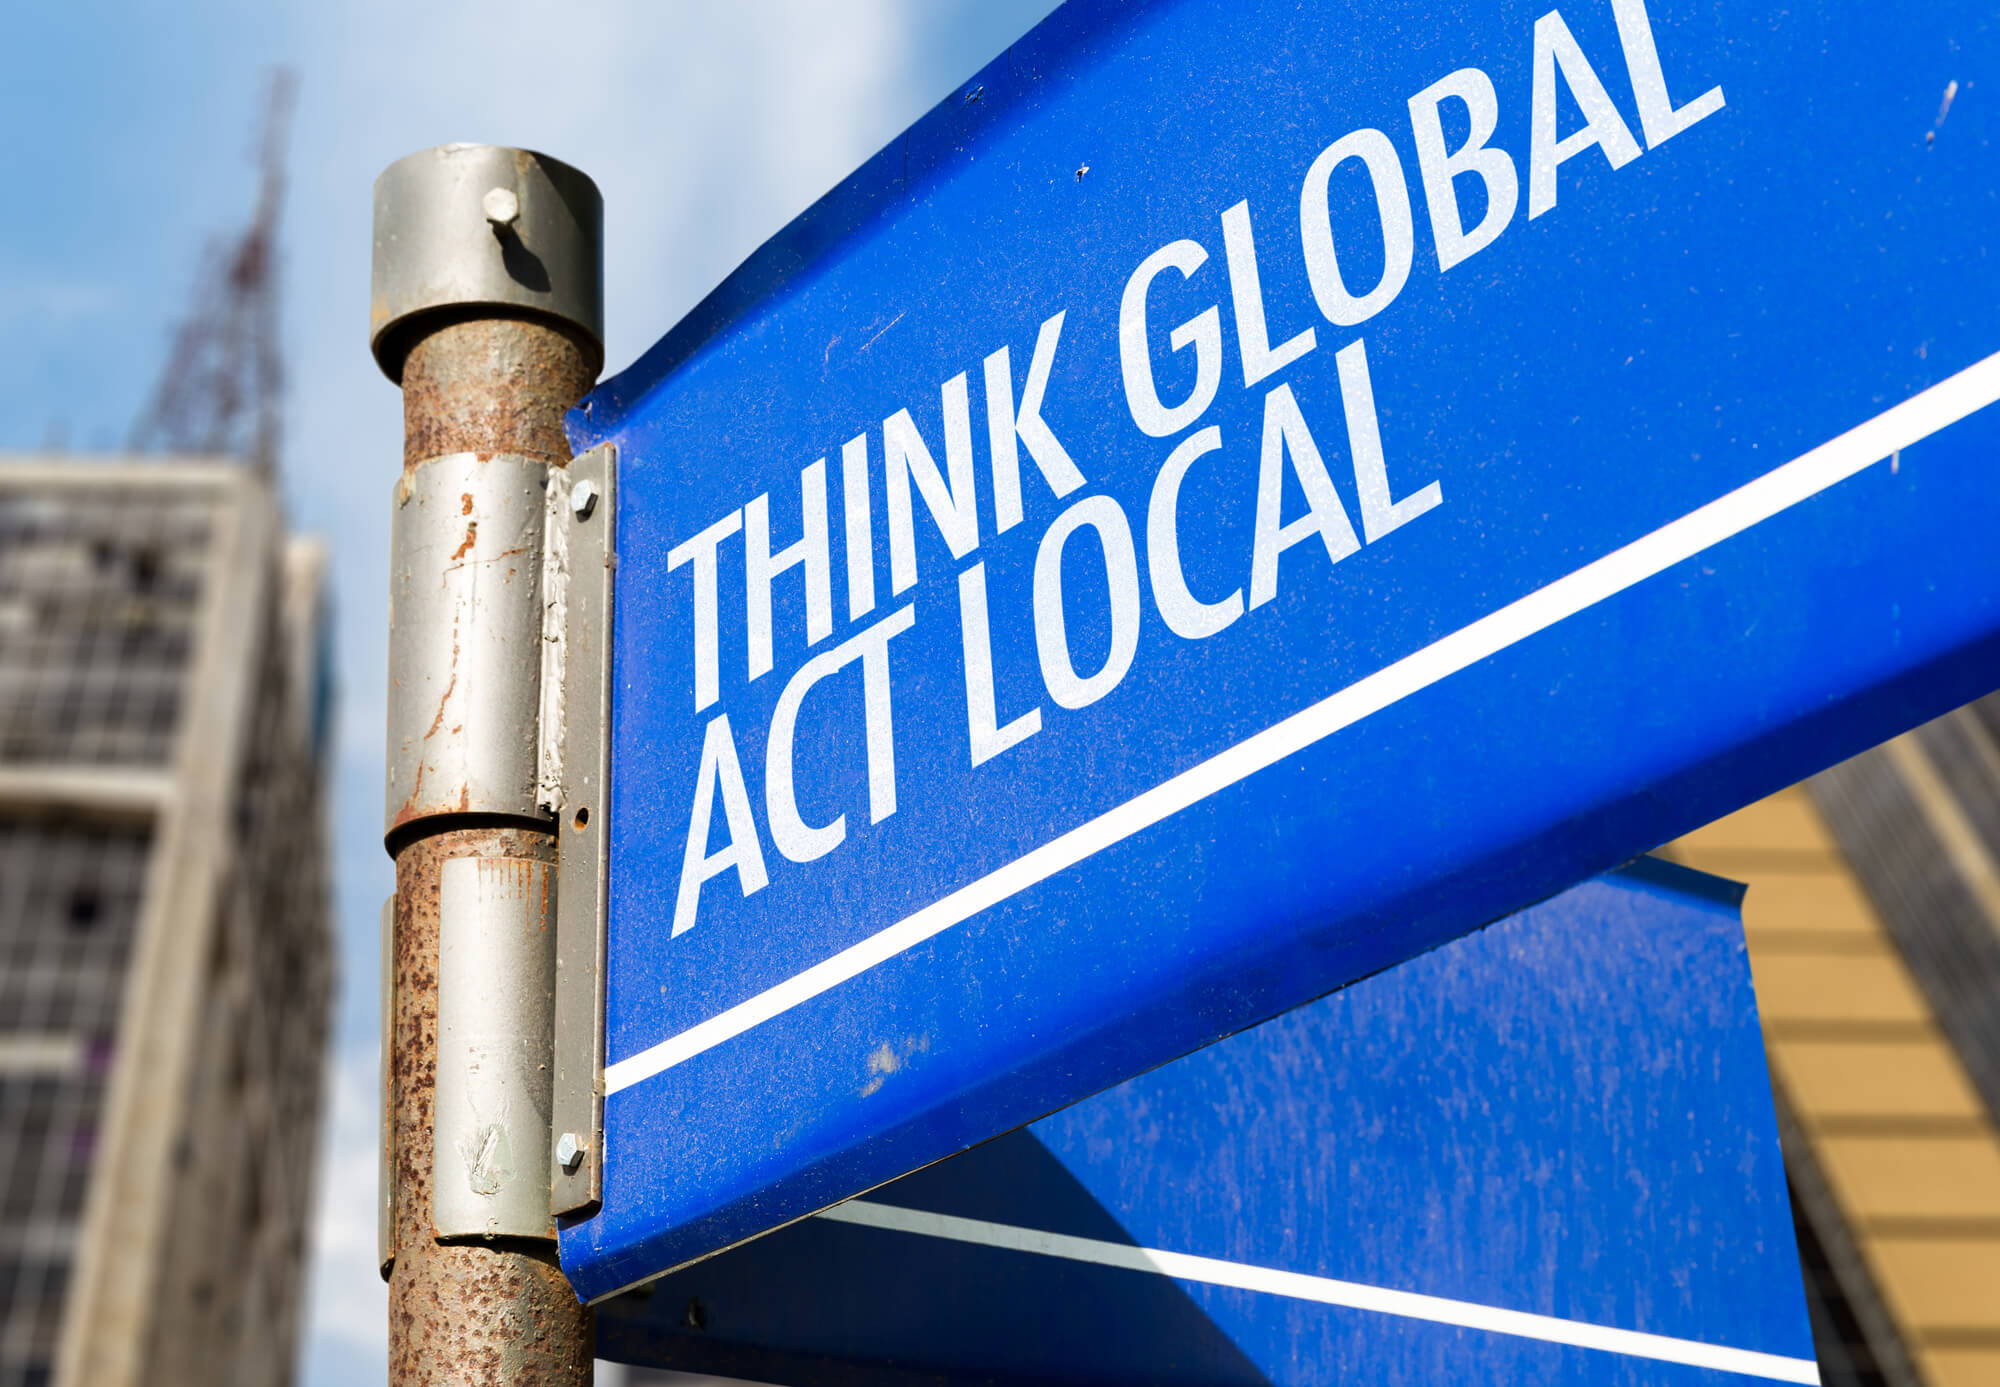 Think Global Act Local on street signs